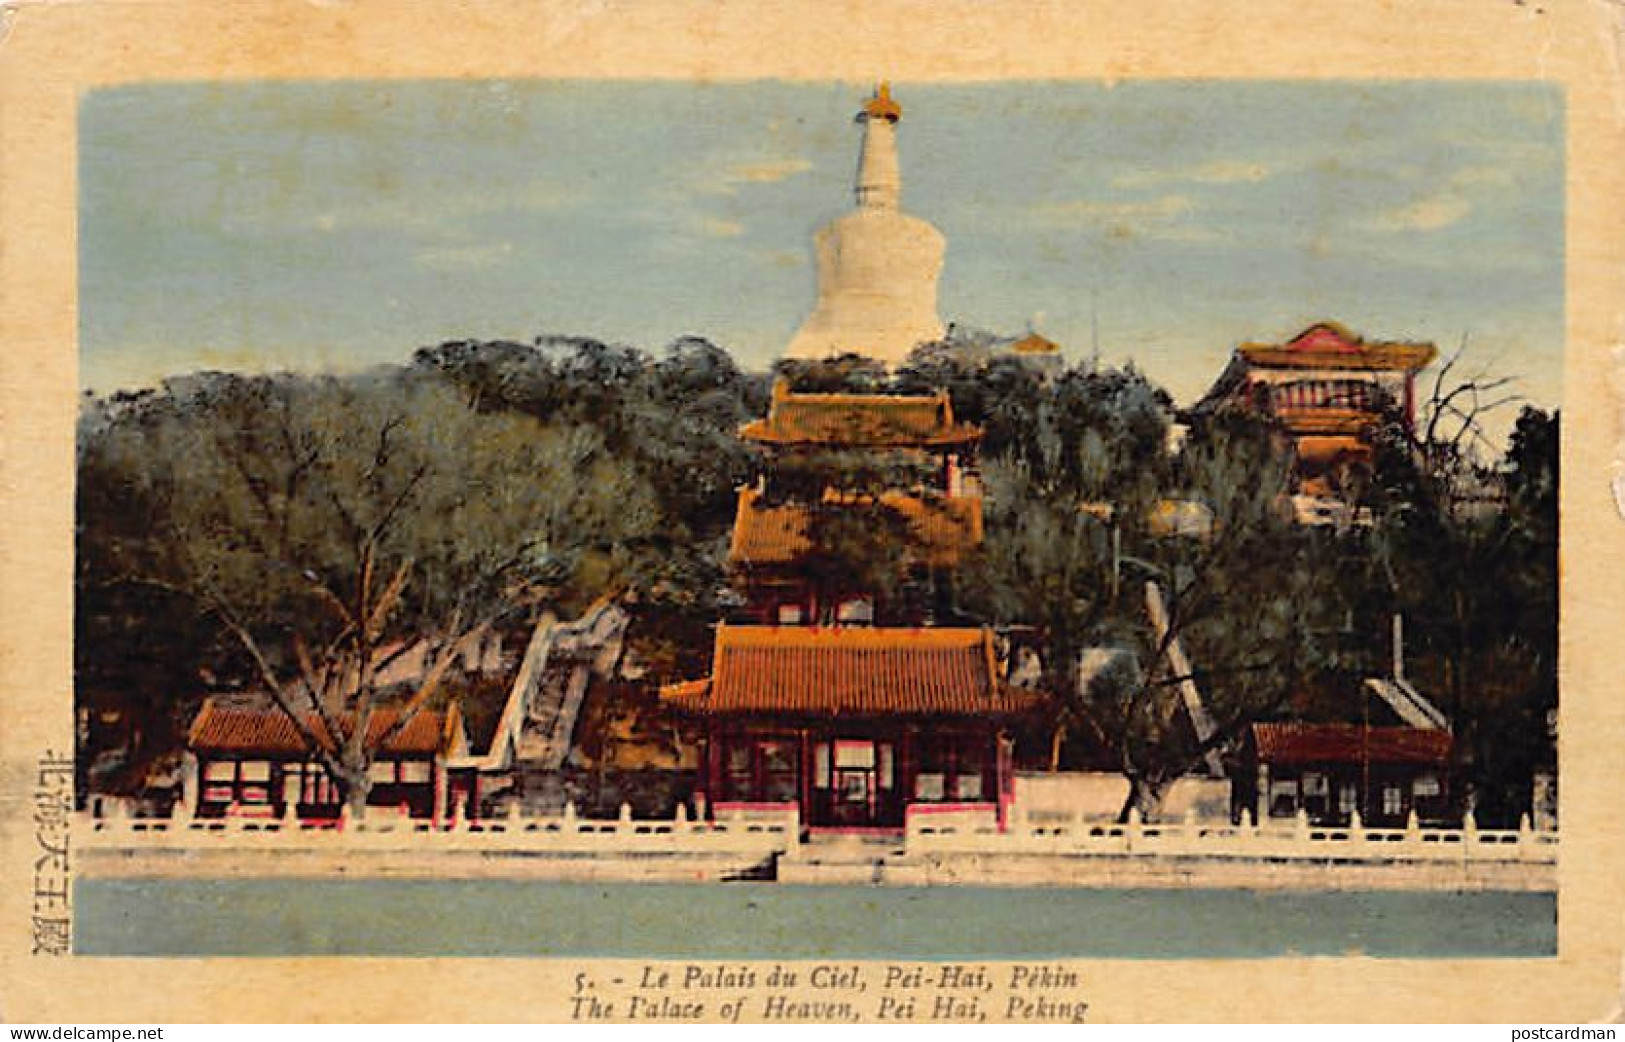 China - BEIJING - The Temple Of Heaven - Publ. Unknown 5 - Chine